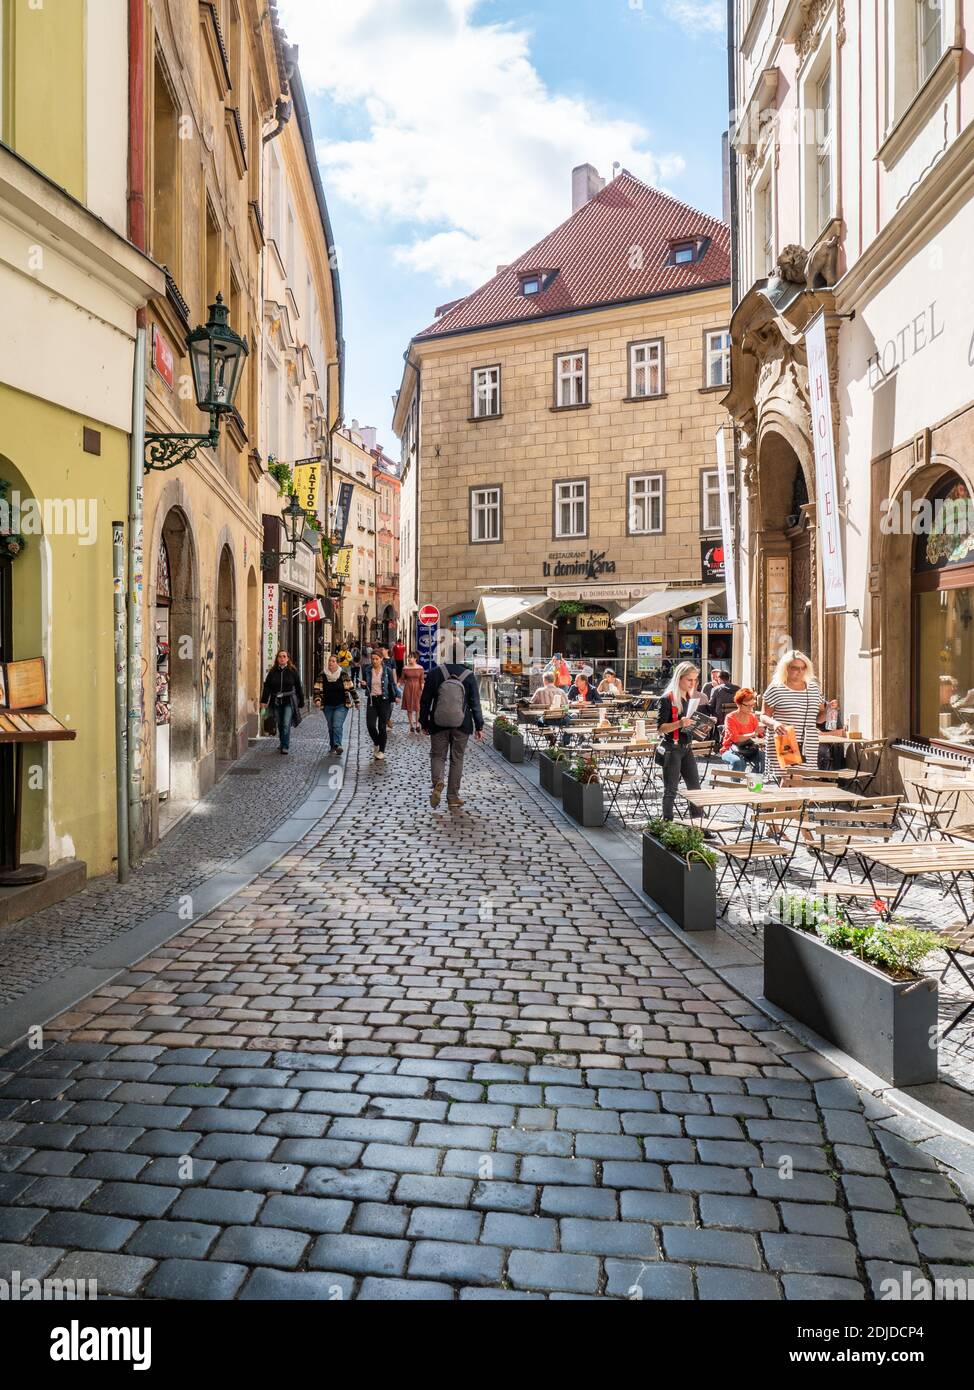 Prague Old Town. A busy urban scene in the narrow cobbled streets of the Czech Republic capital city with shoppers and tourists at a street cafe. Stock Photo